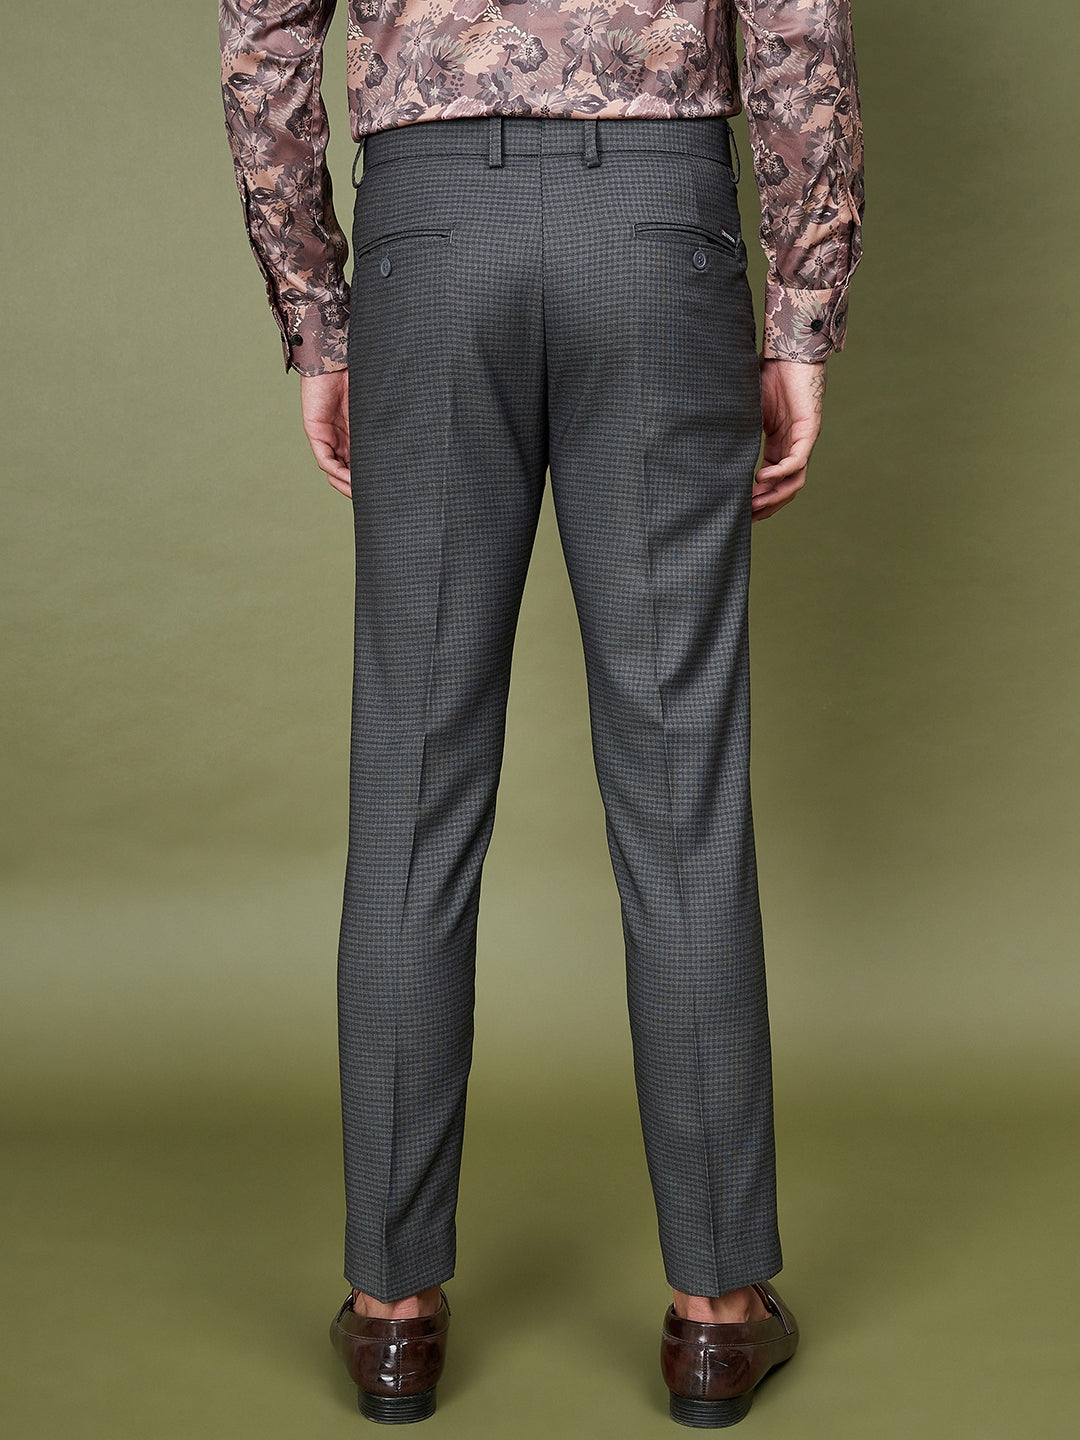 Men's Black Polyester Checked Formal Trousers